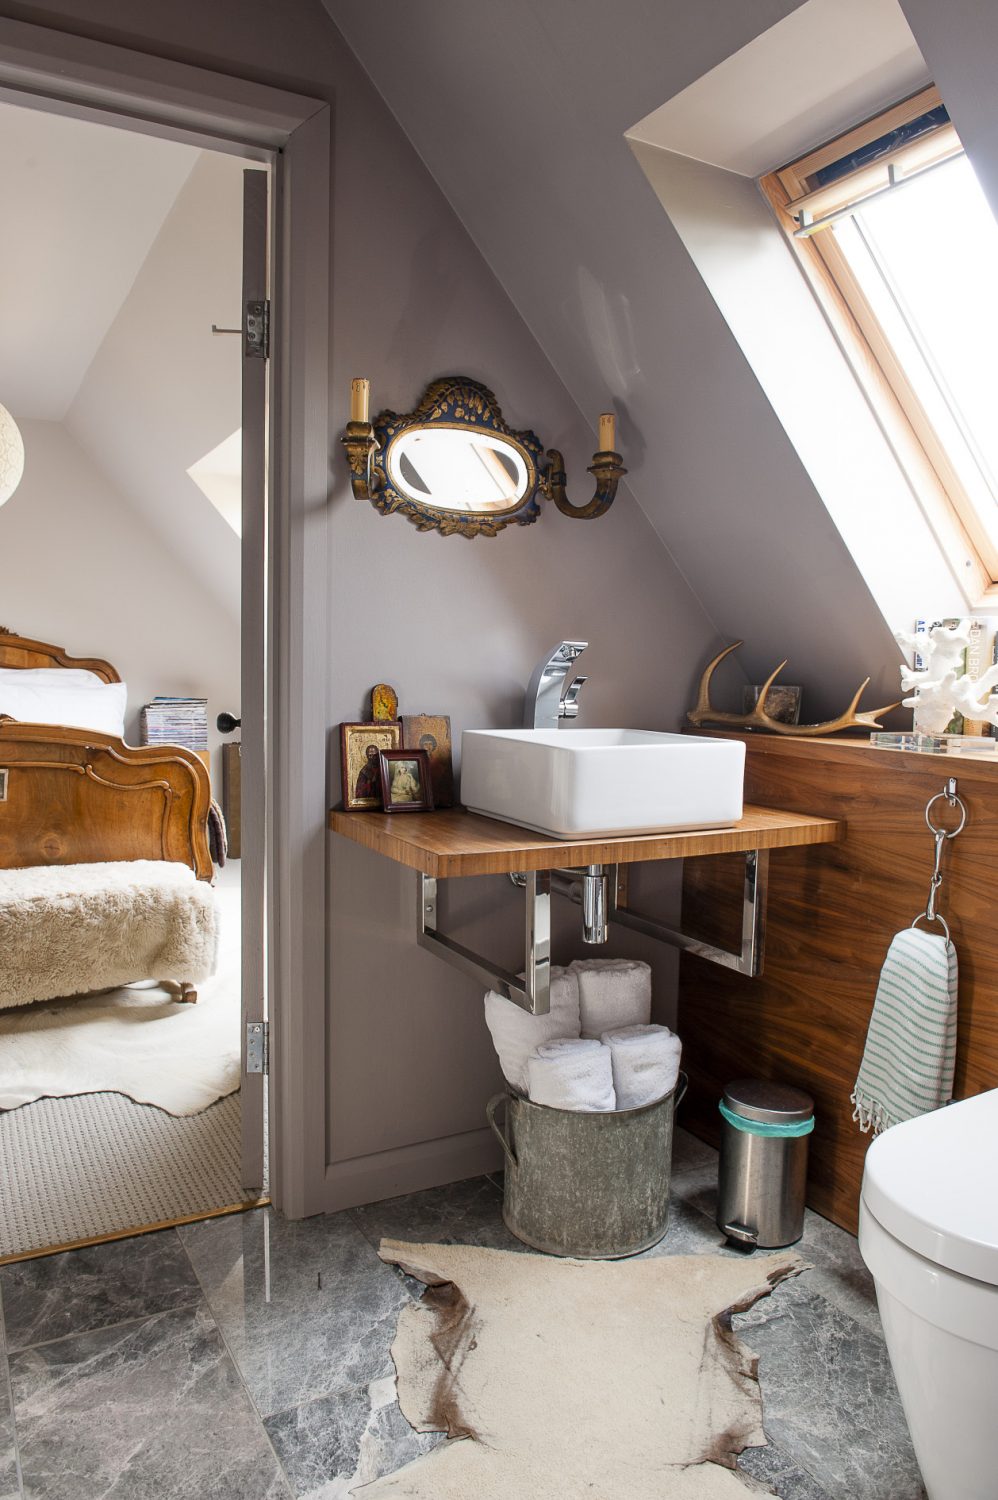 The ‘Jack and Jill’ bathroom can be entered from both guest rooms.